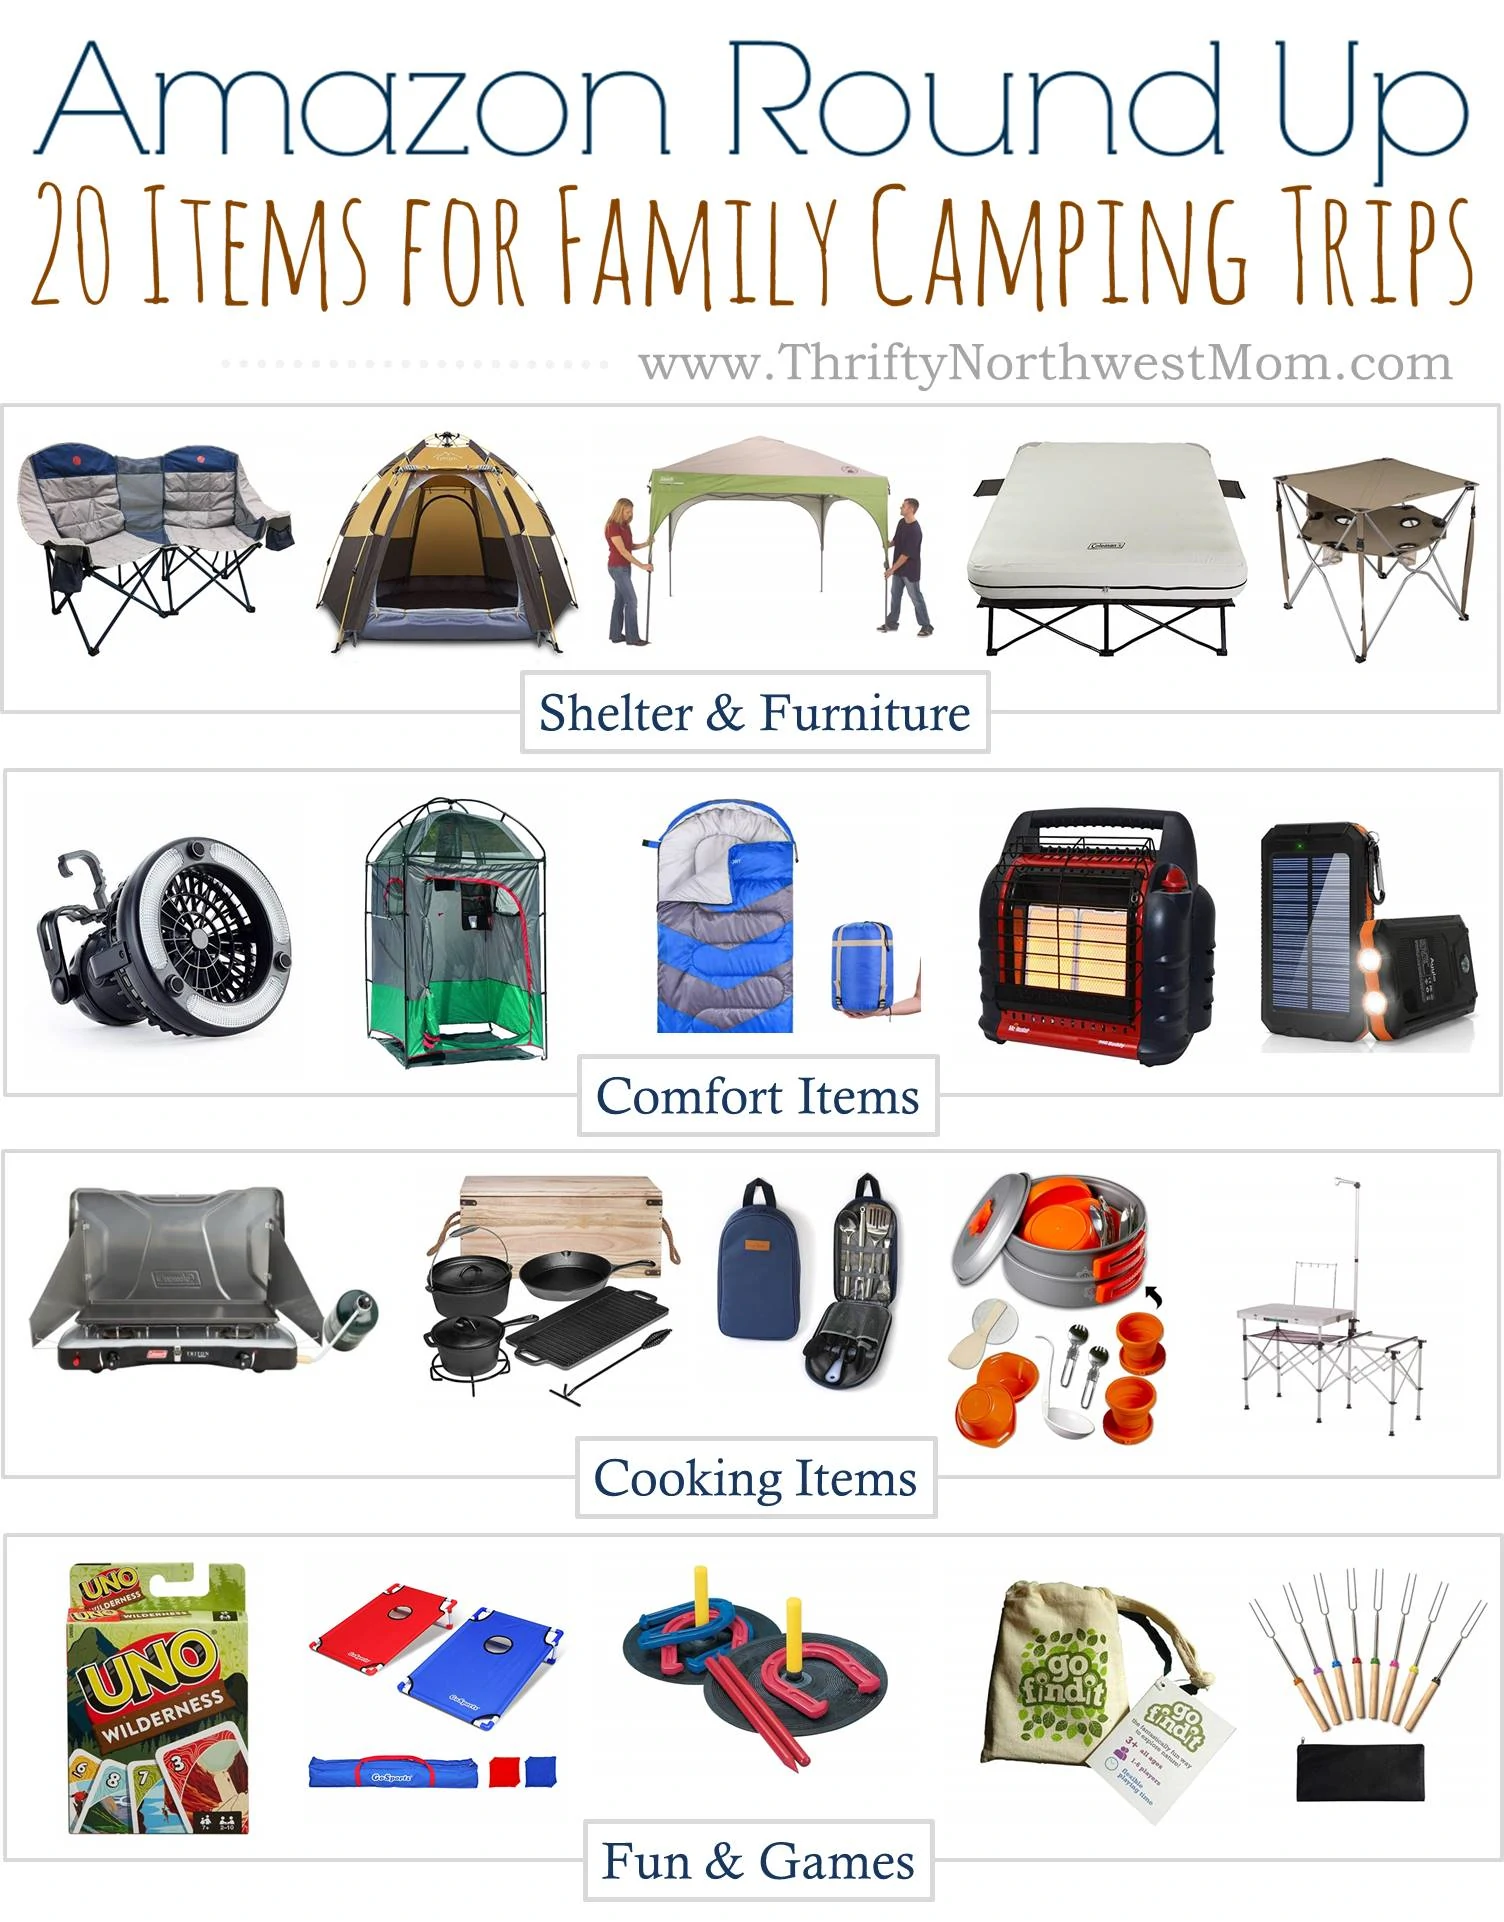 Camping Essentials Checklist: What To Take Camping